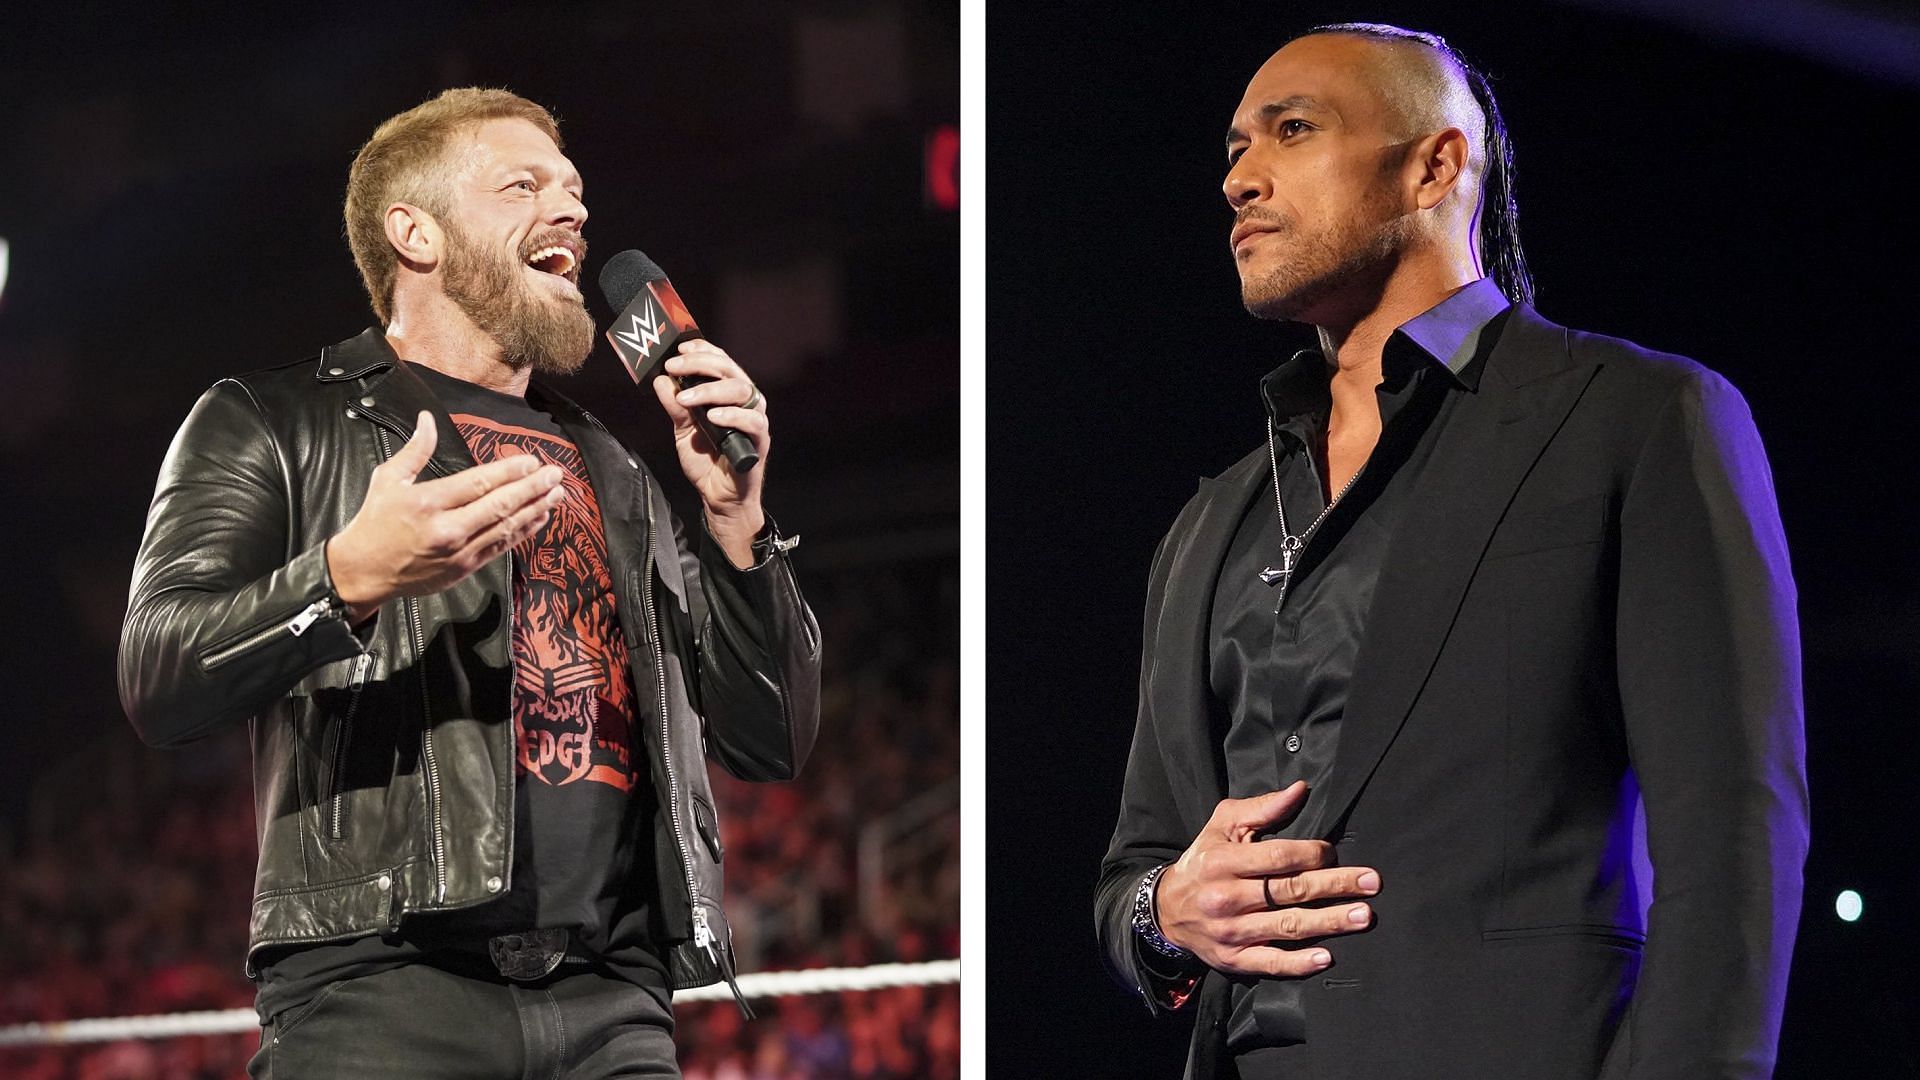 Edge and Damian Priest are set to collide on WWE RAW